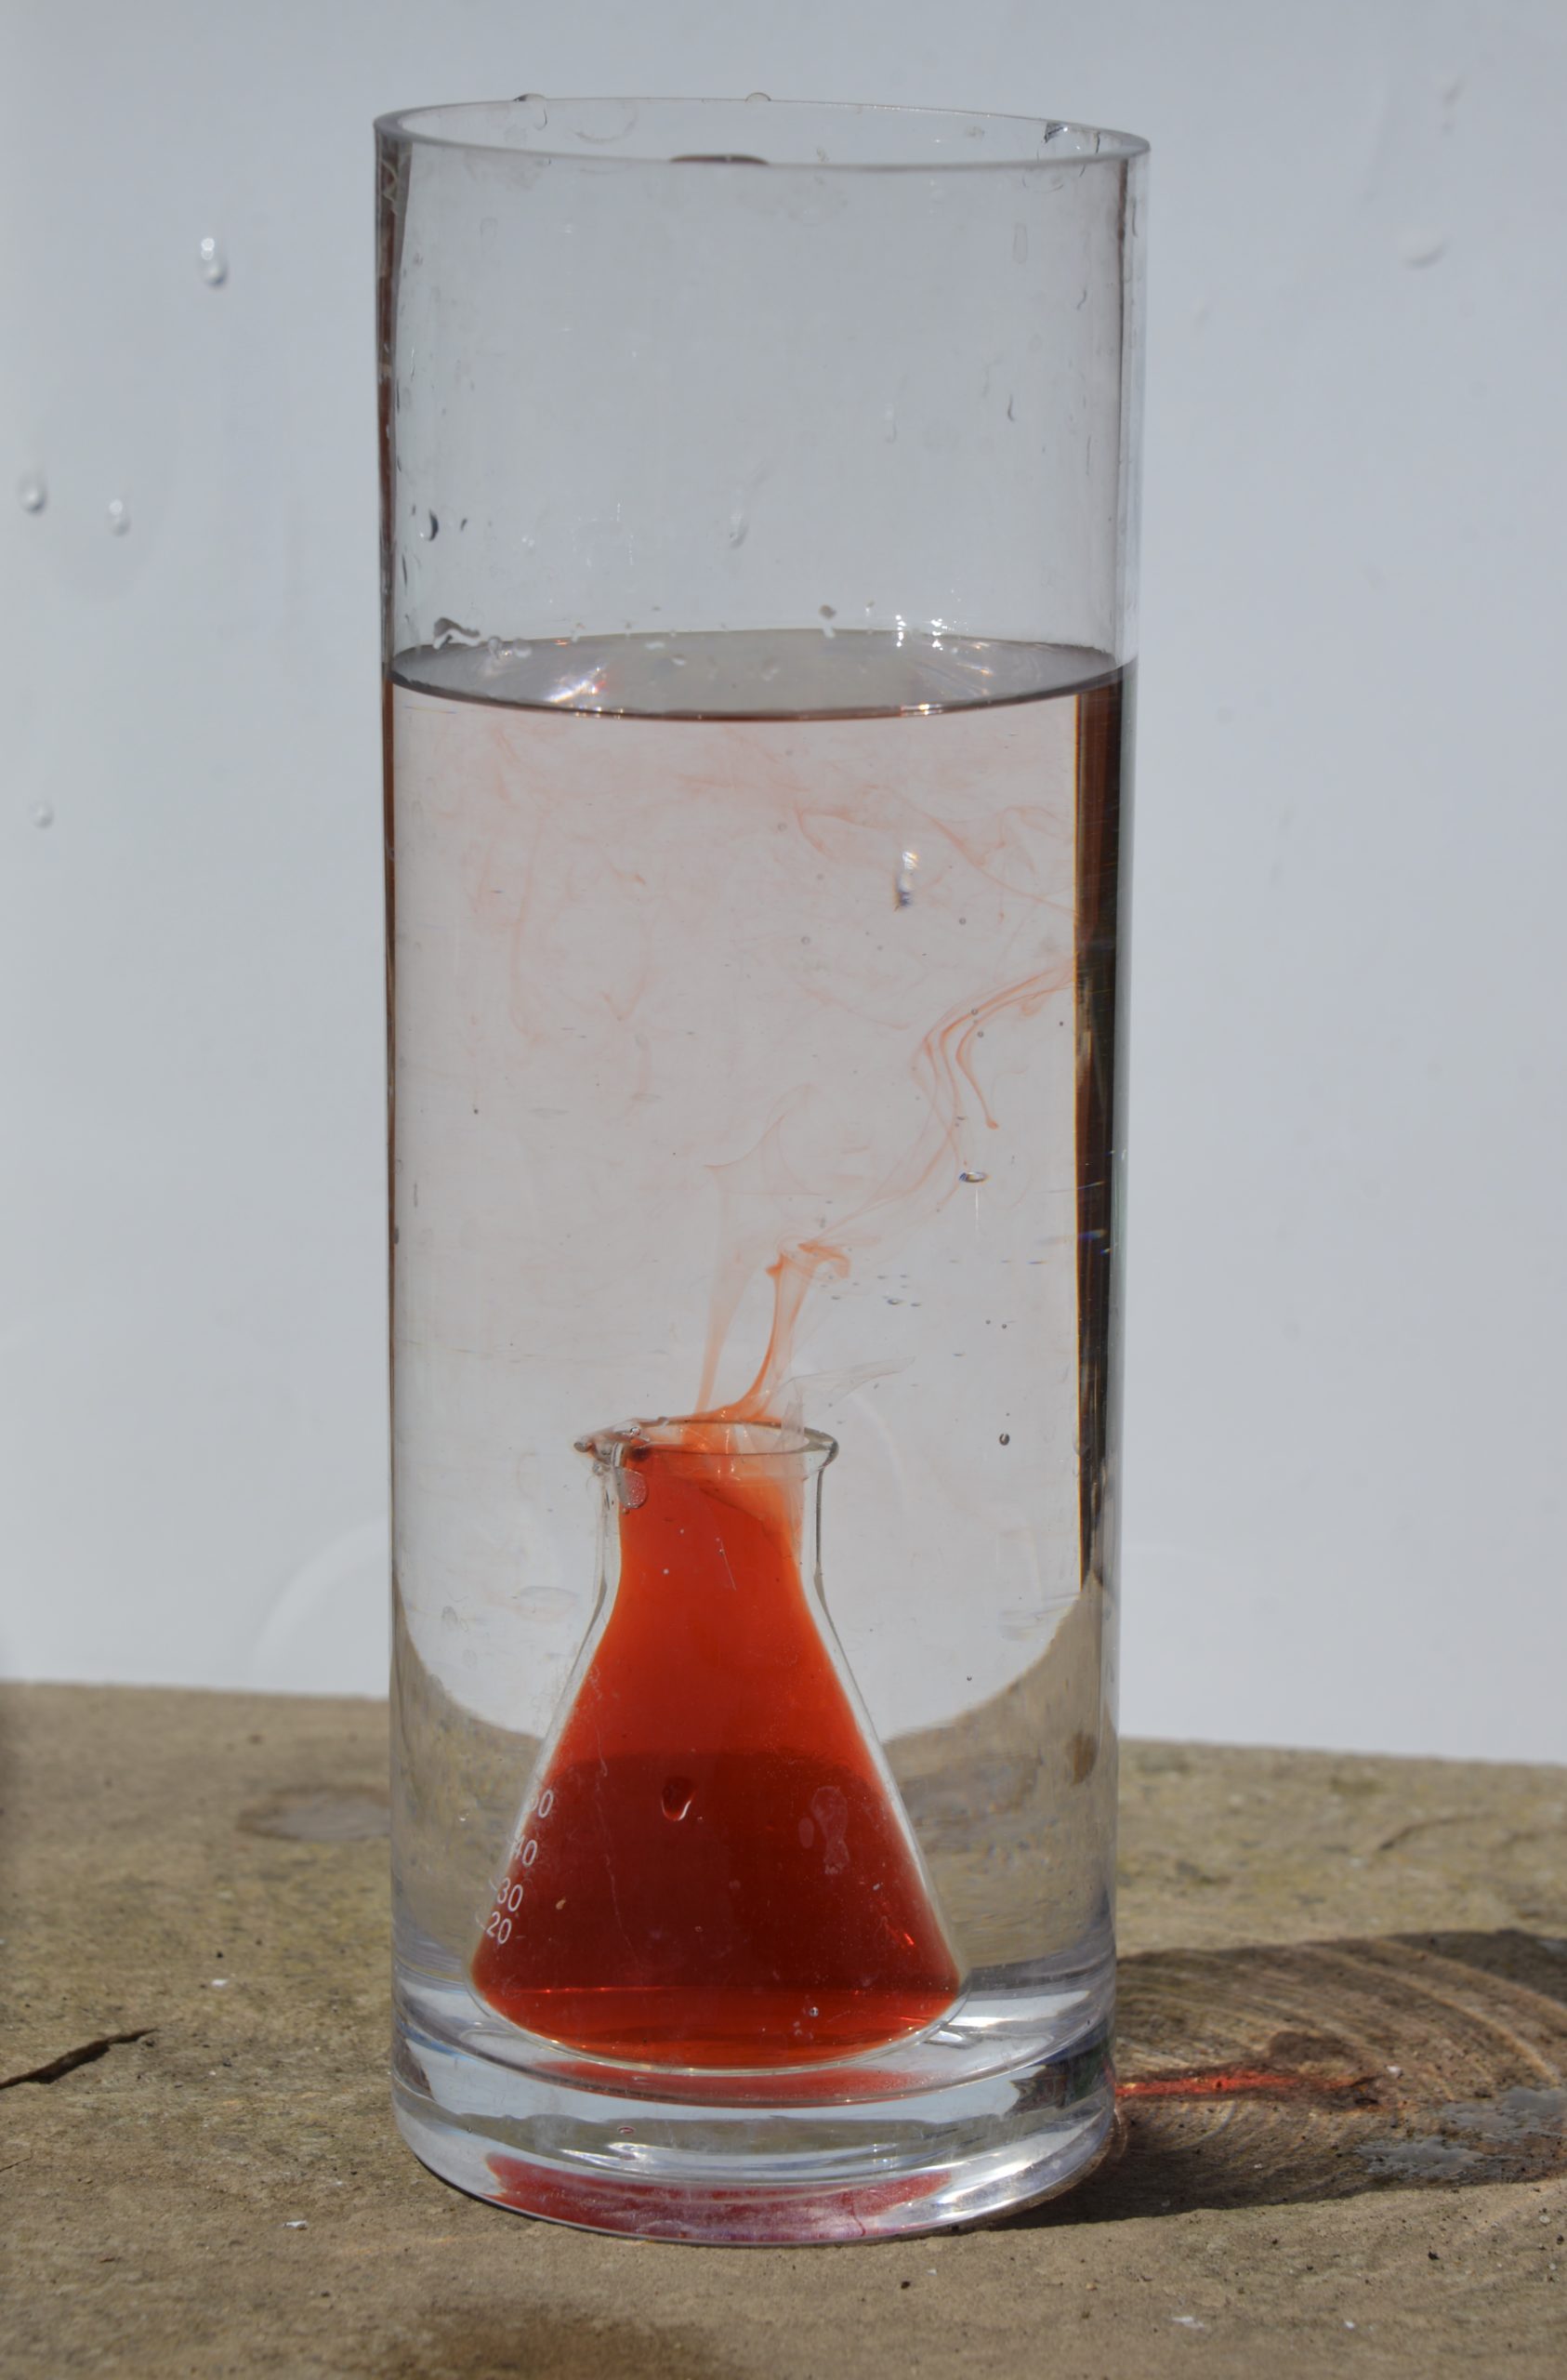 A jar of cold water with a smaller jar or warm water inside for a convection current demonstration